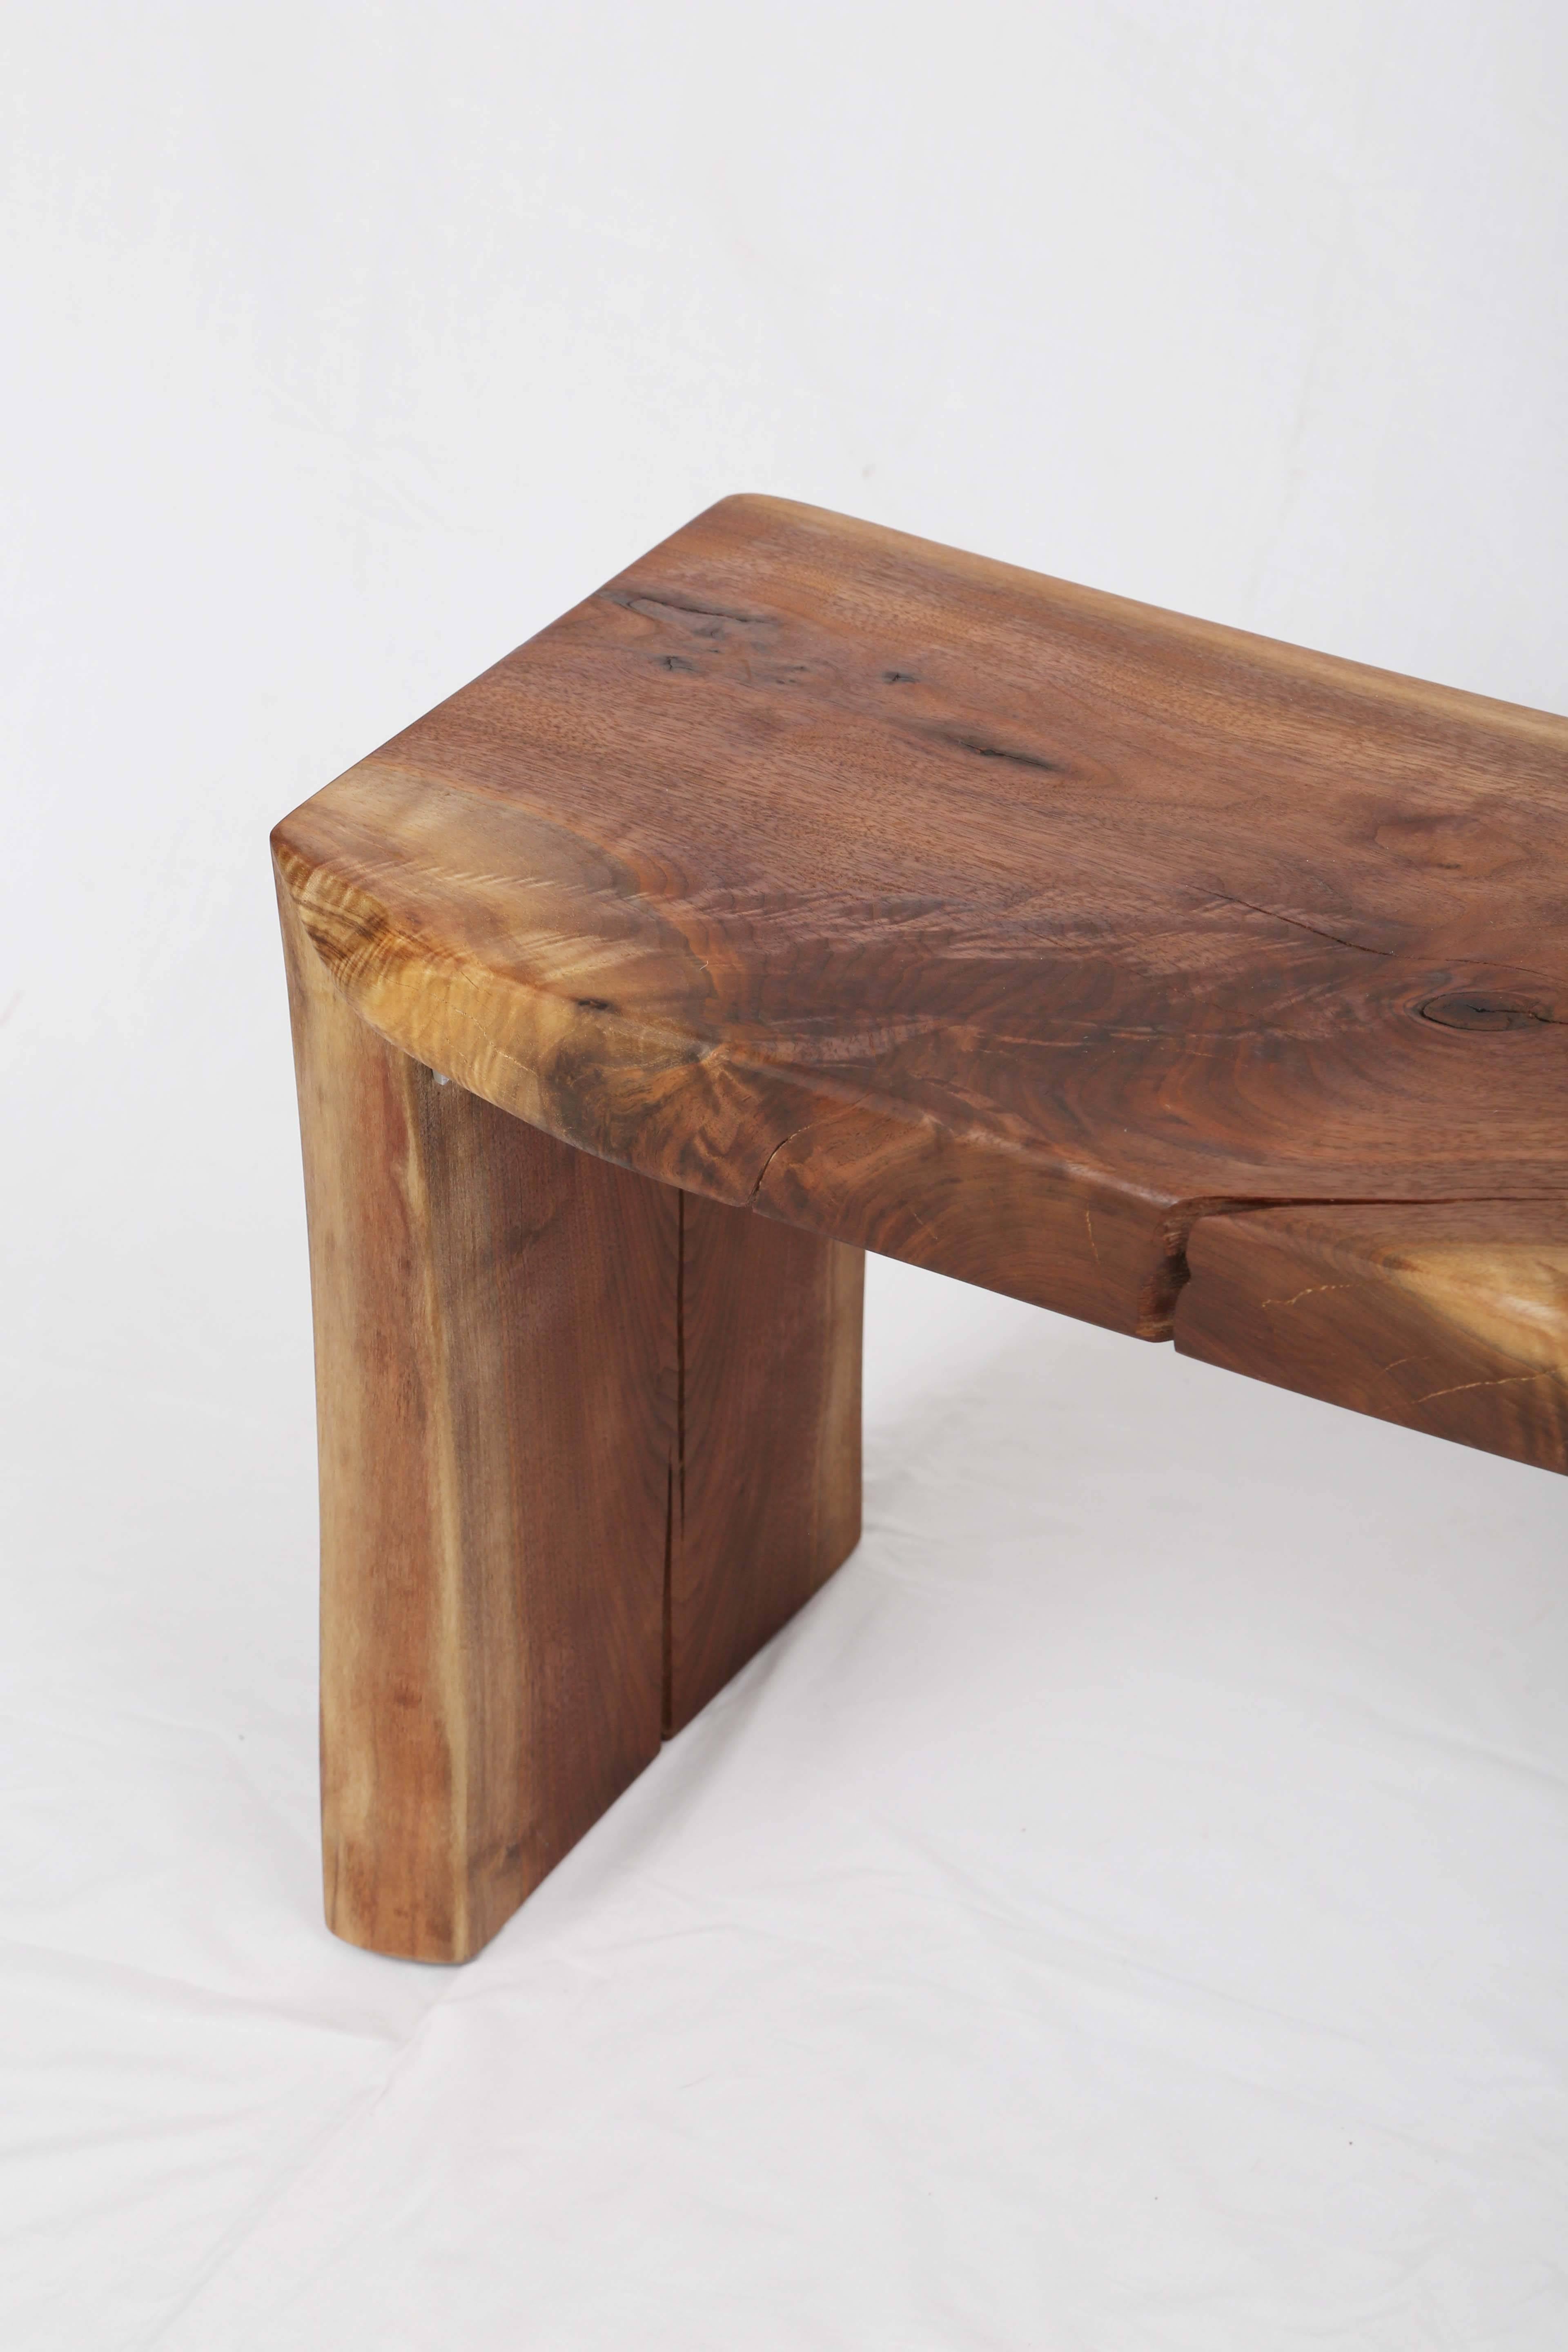 North American One of Its Kind Handmade, Artisan Black Walnut Bench Signed by the Artist